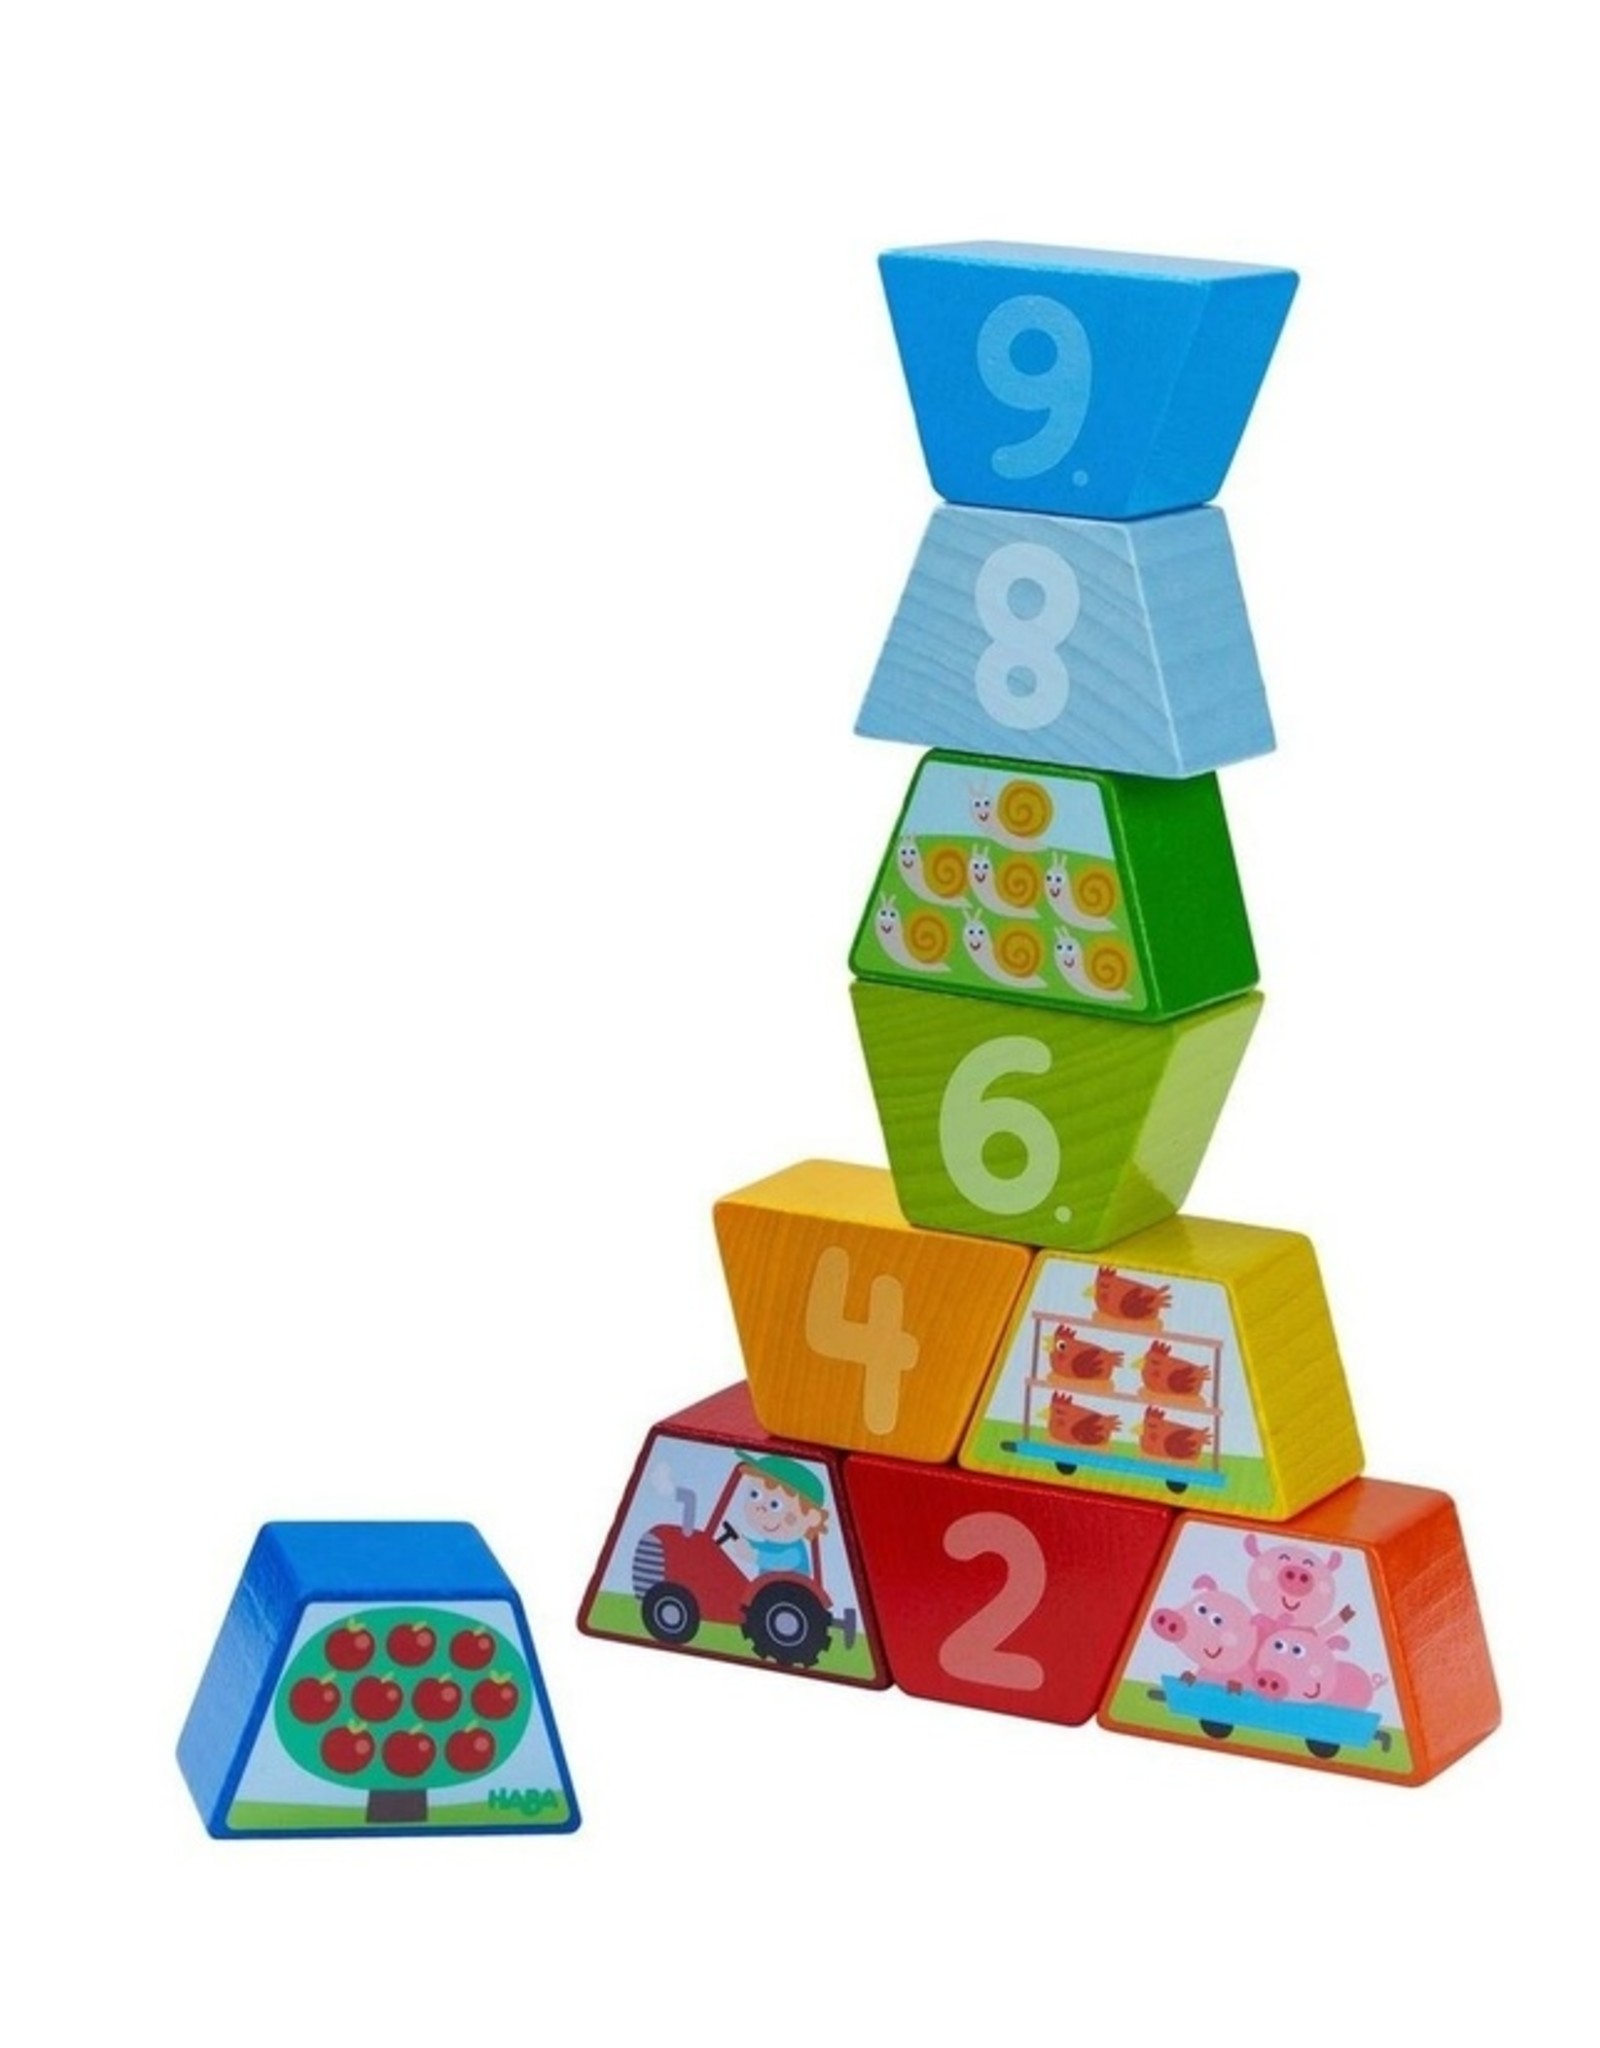 HABA Numbers Farm Arranging Game